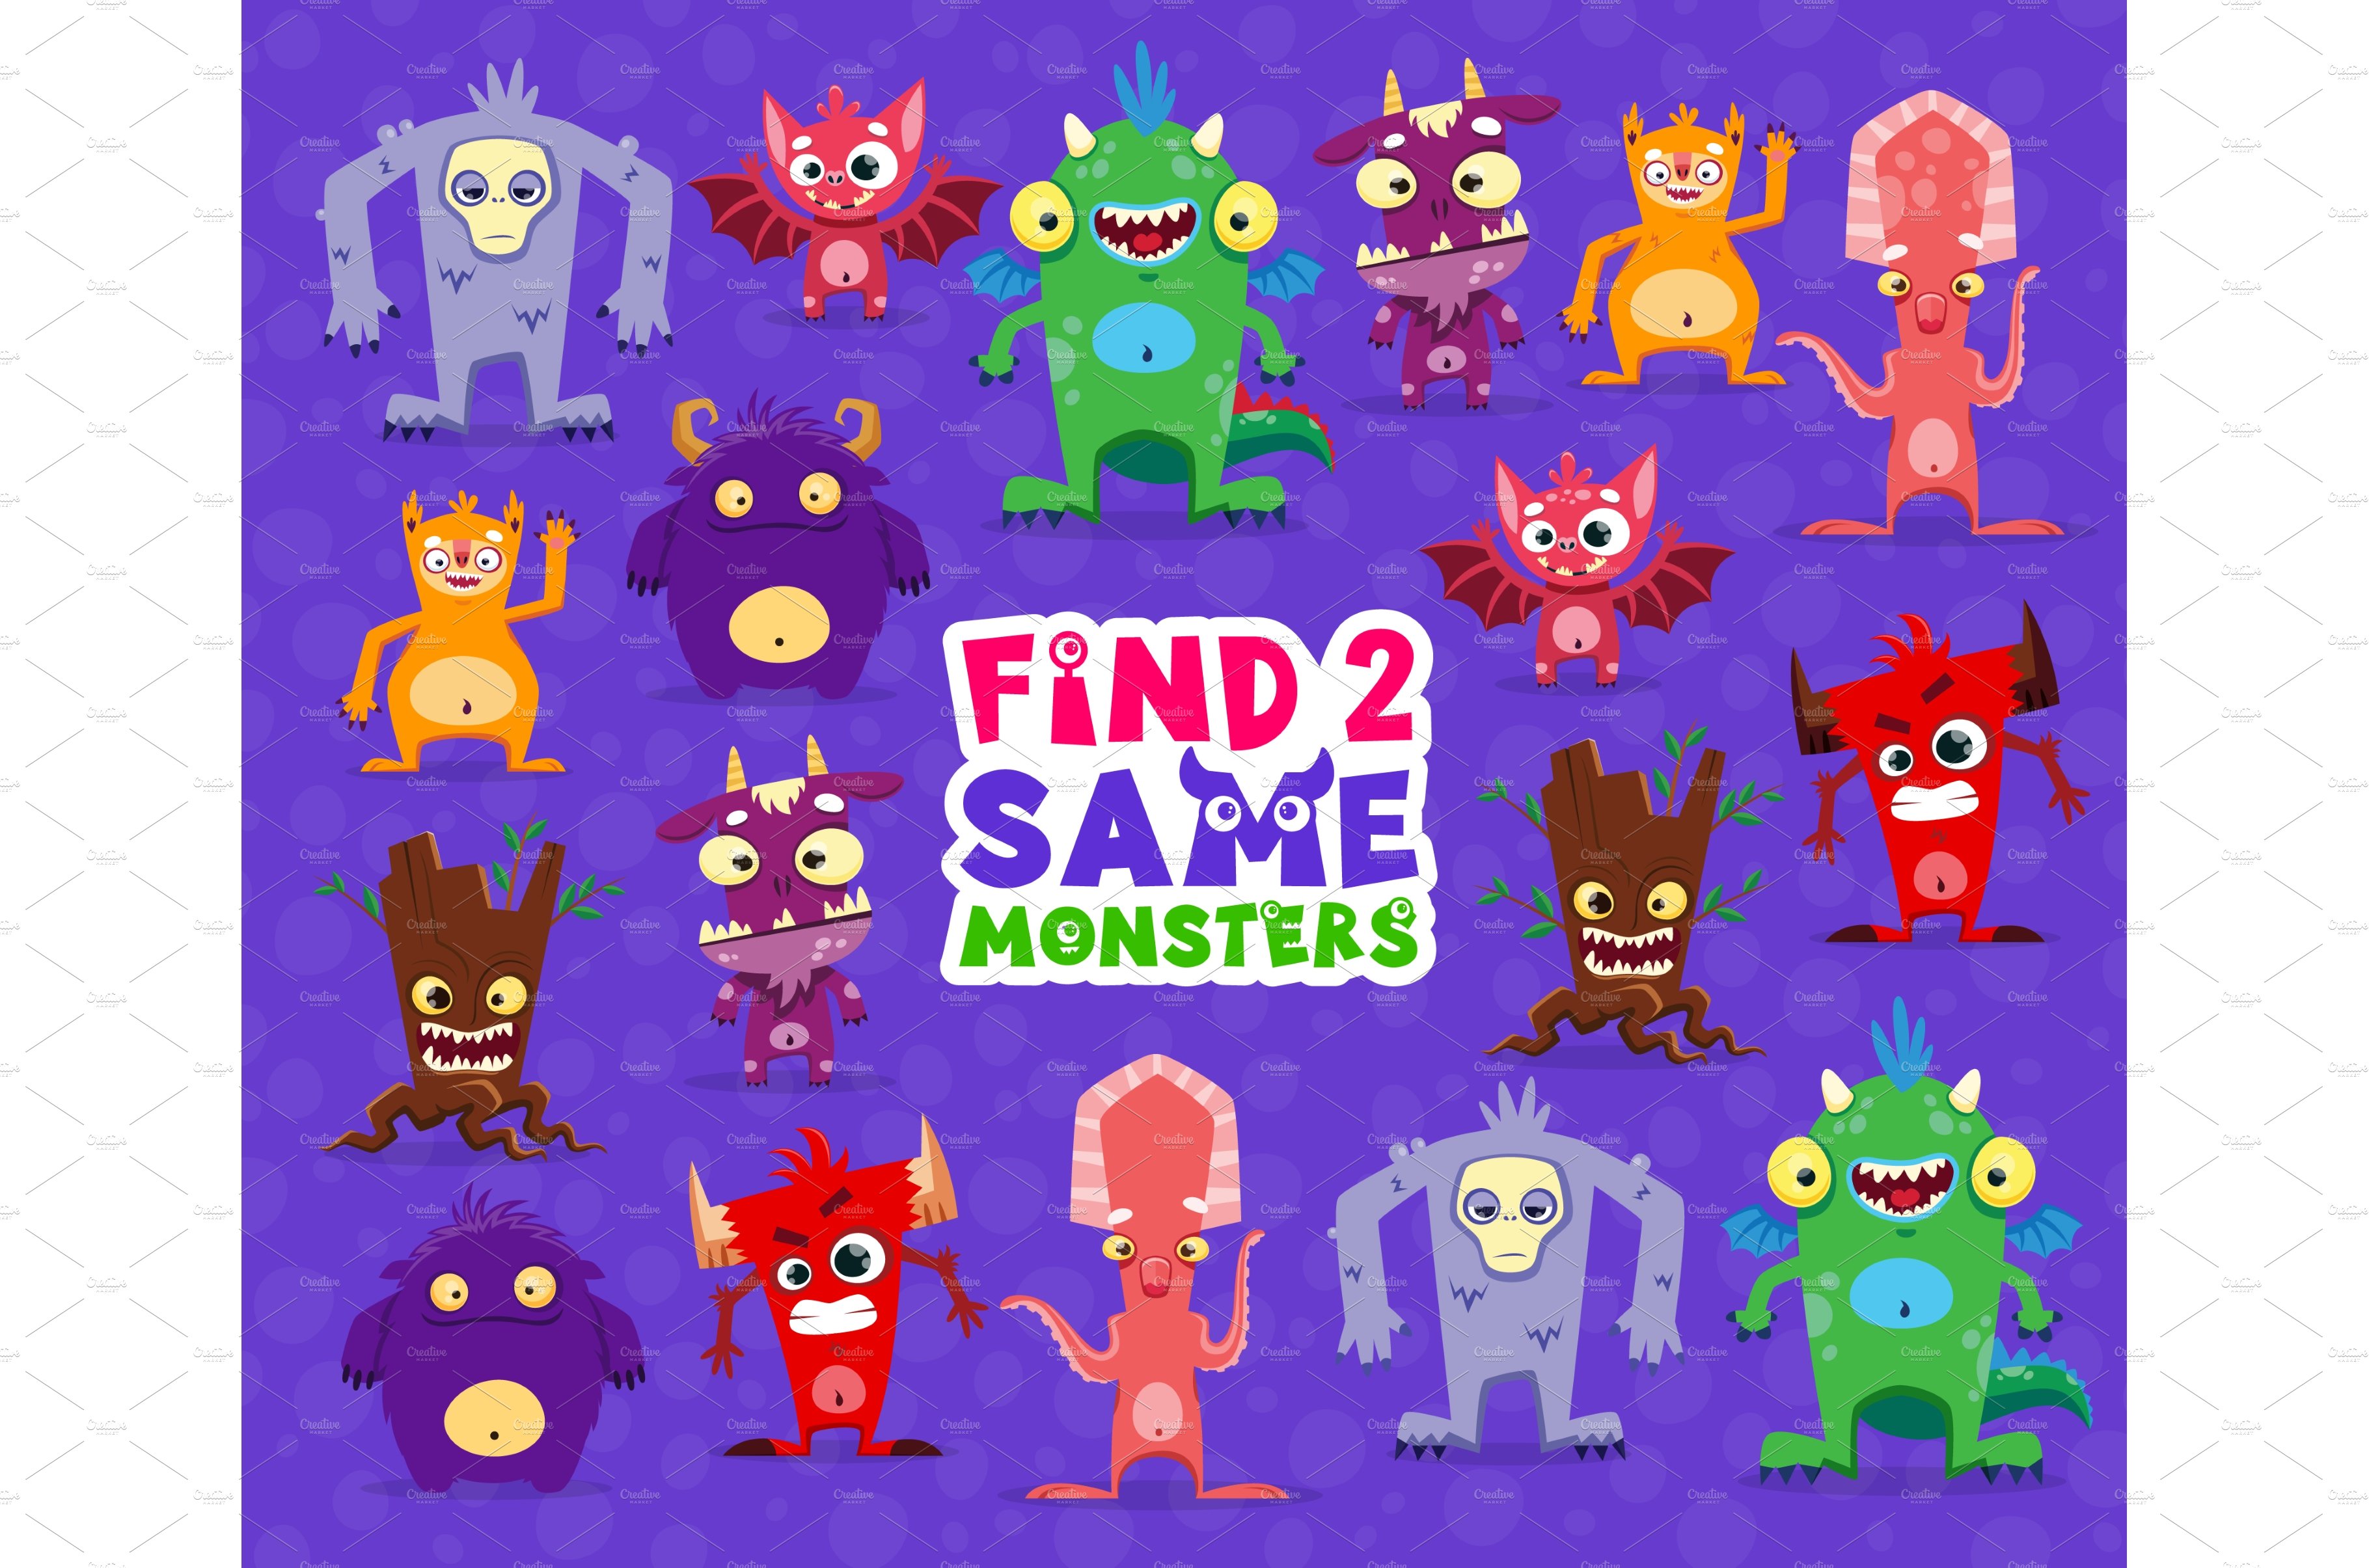 Find two same cartoon monsters cover image.